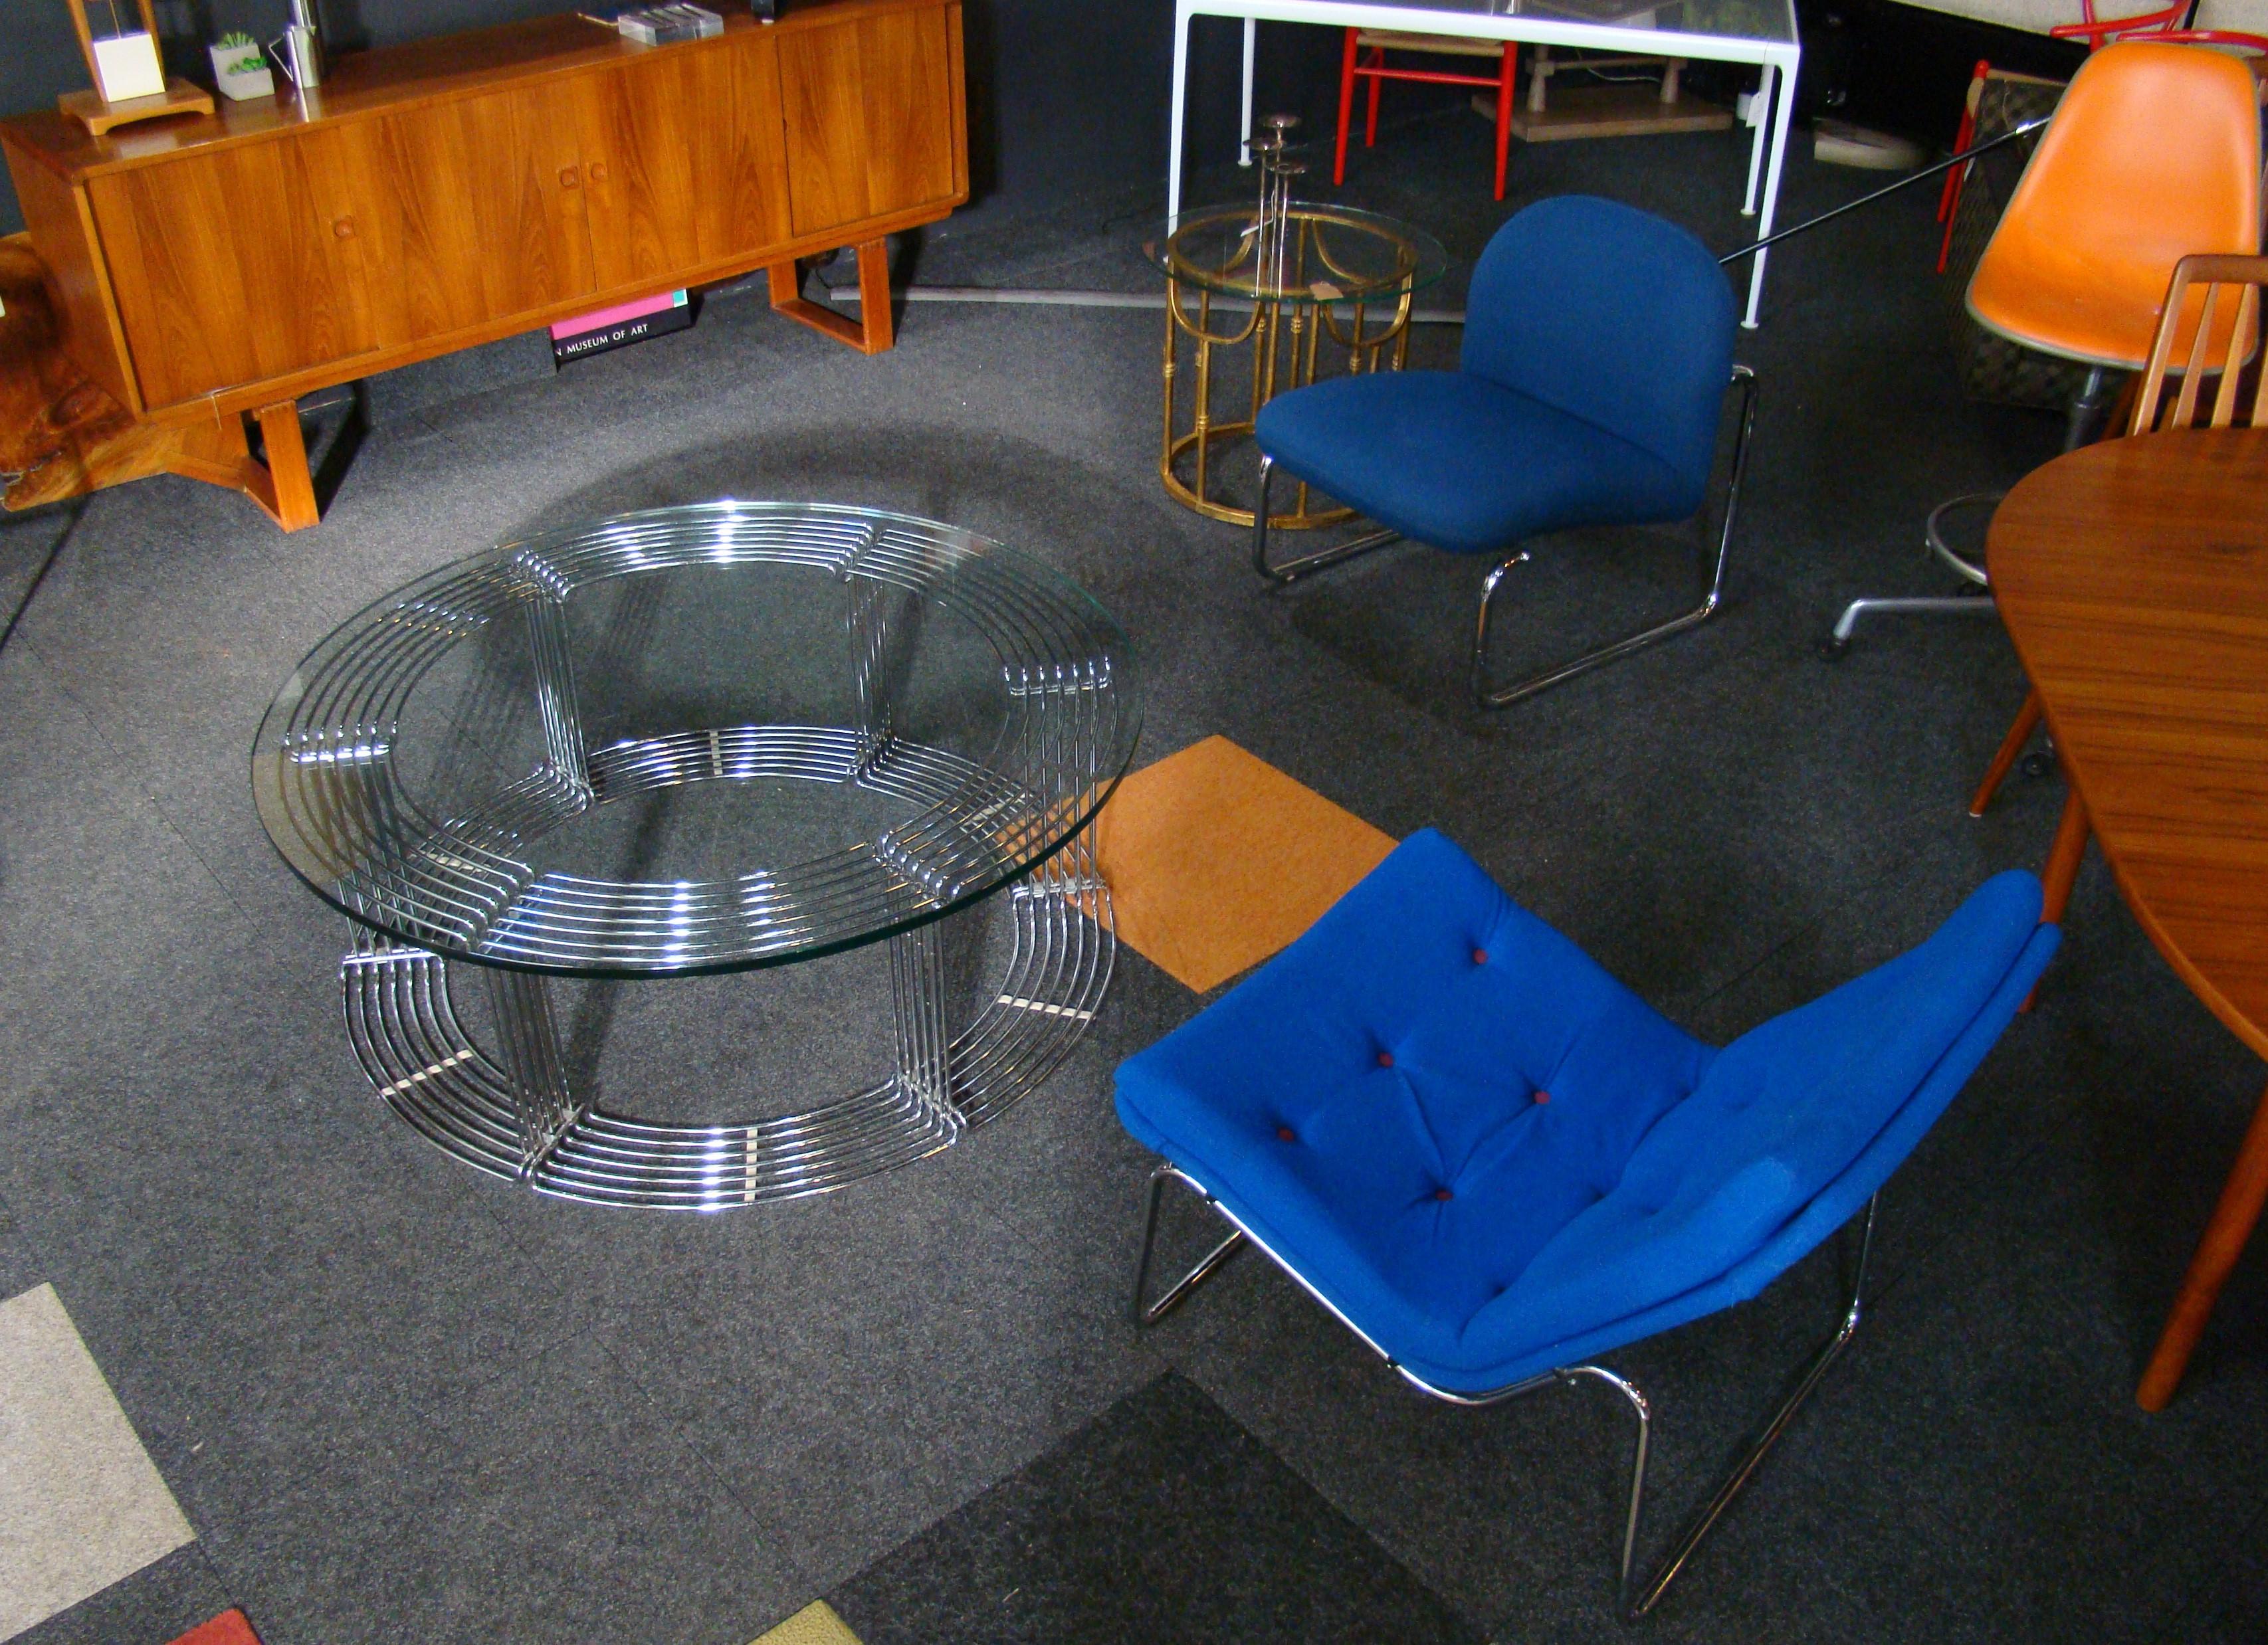 Rare coffee table designed by Verner Panton for Fritz Hansen, Denmark 1971. This chrome wire coffee table is very hard to find as you often see the dining table. This is from the Pantonova series (known for its control of negative space and